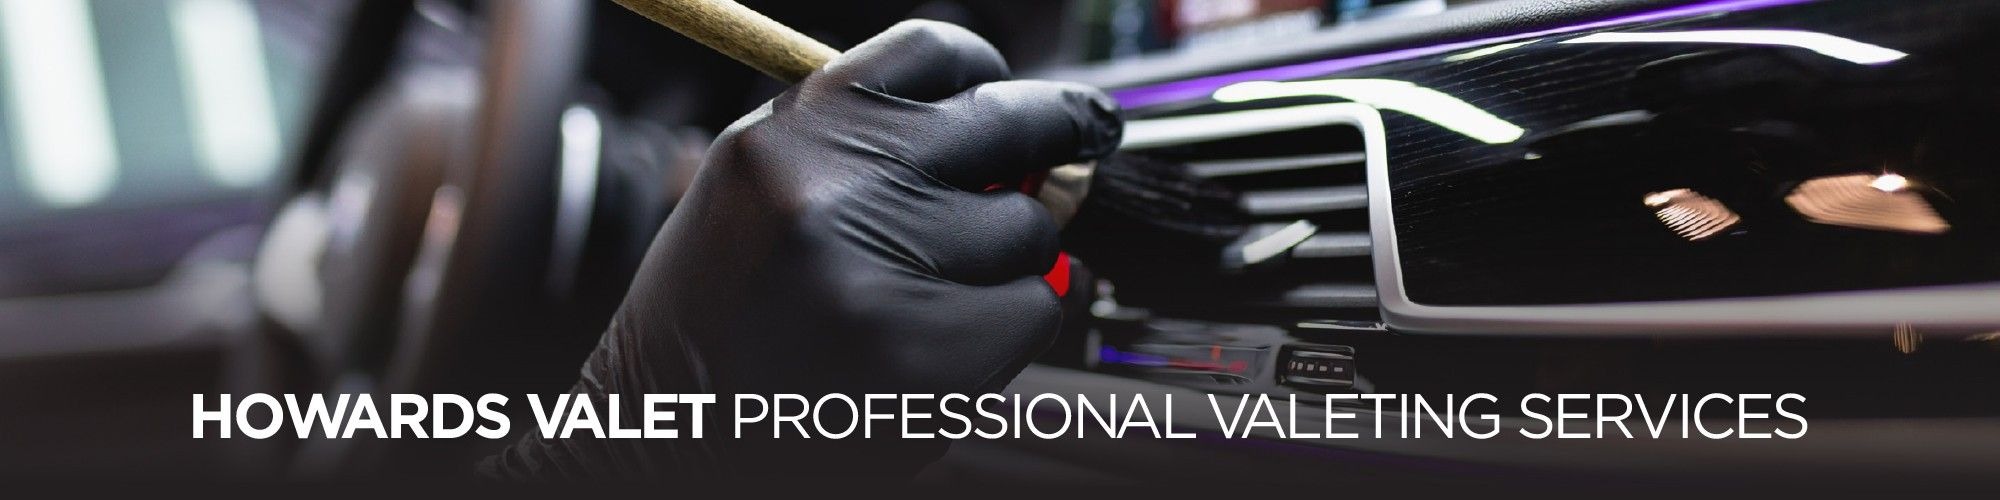 Book a Car Valet with Howards Online